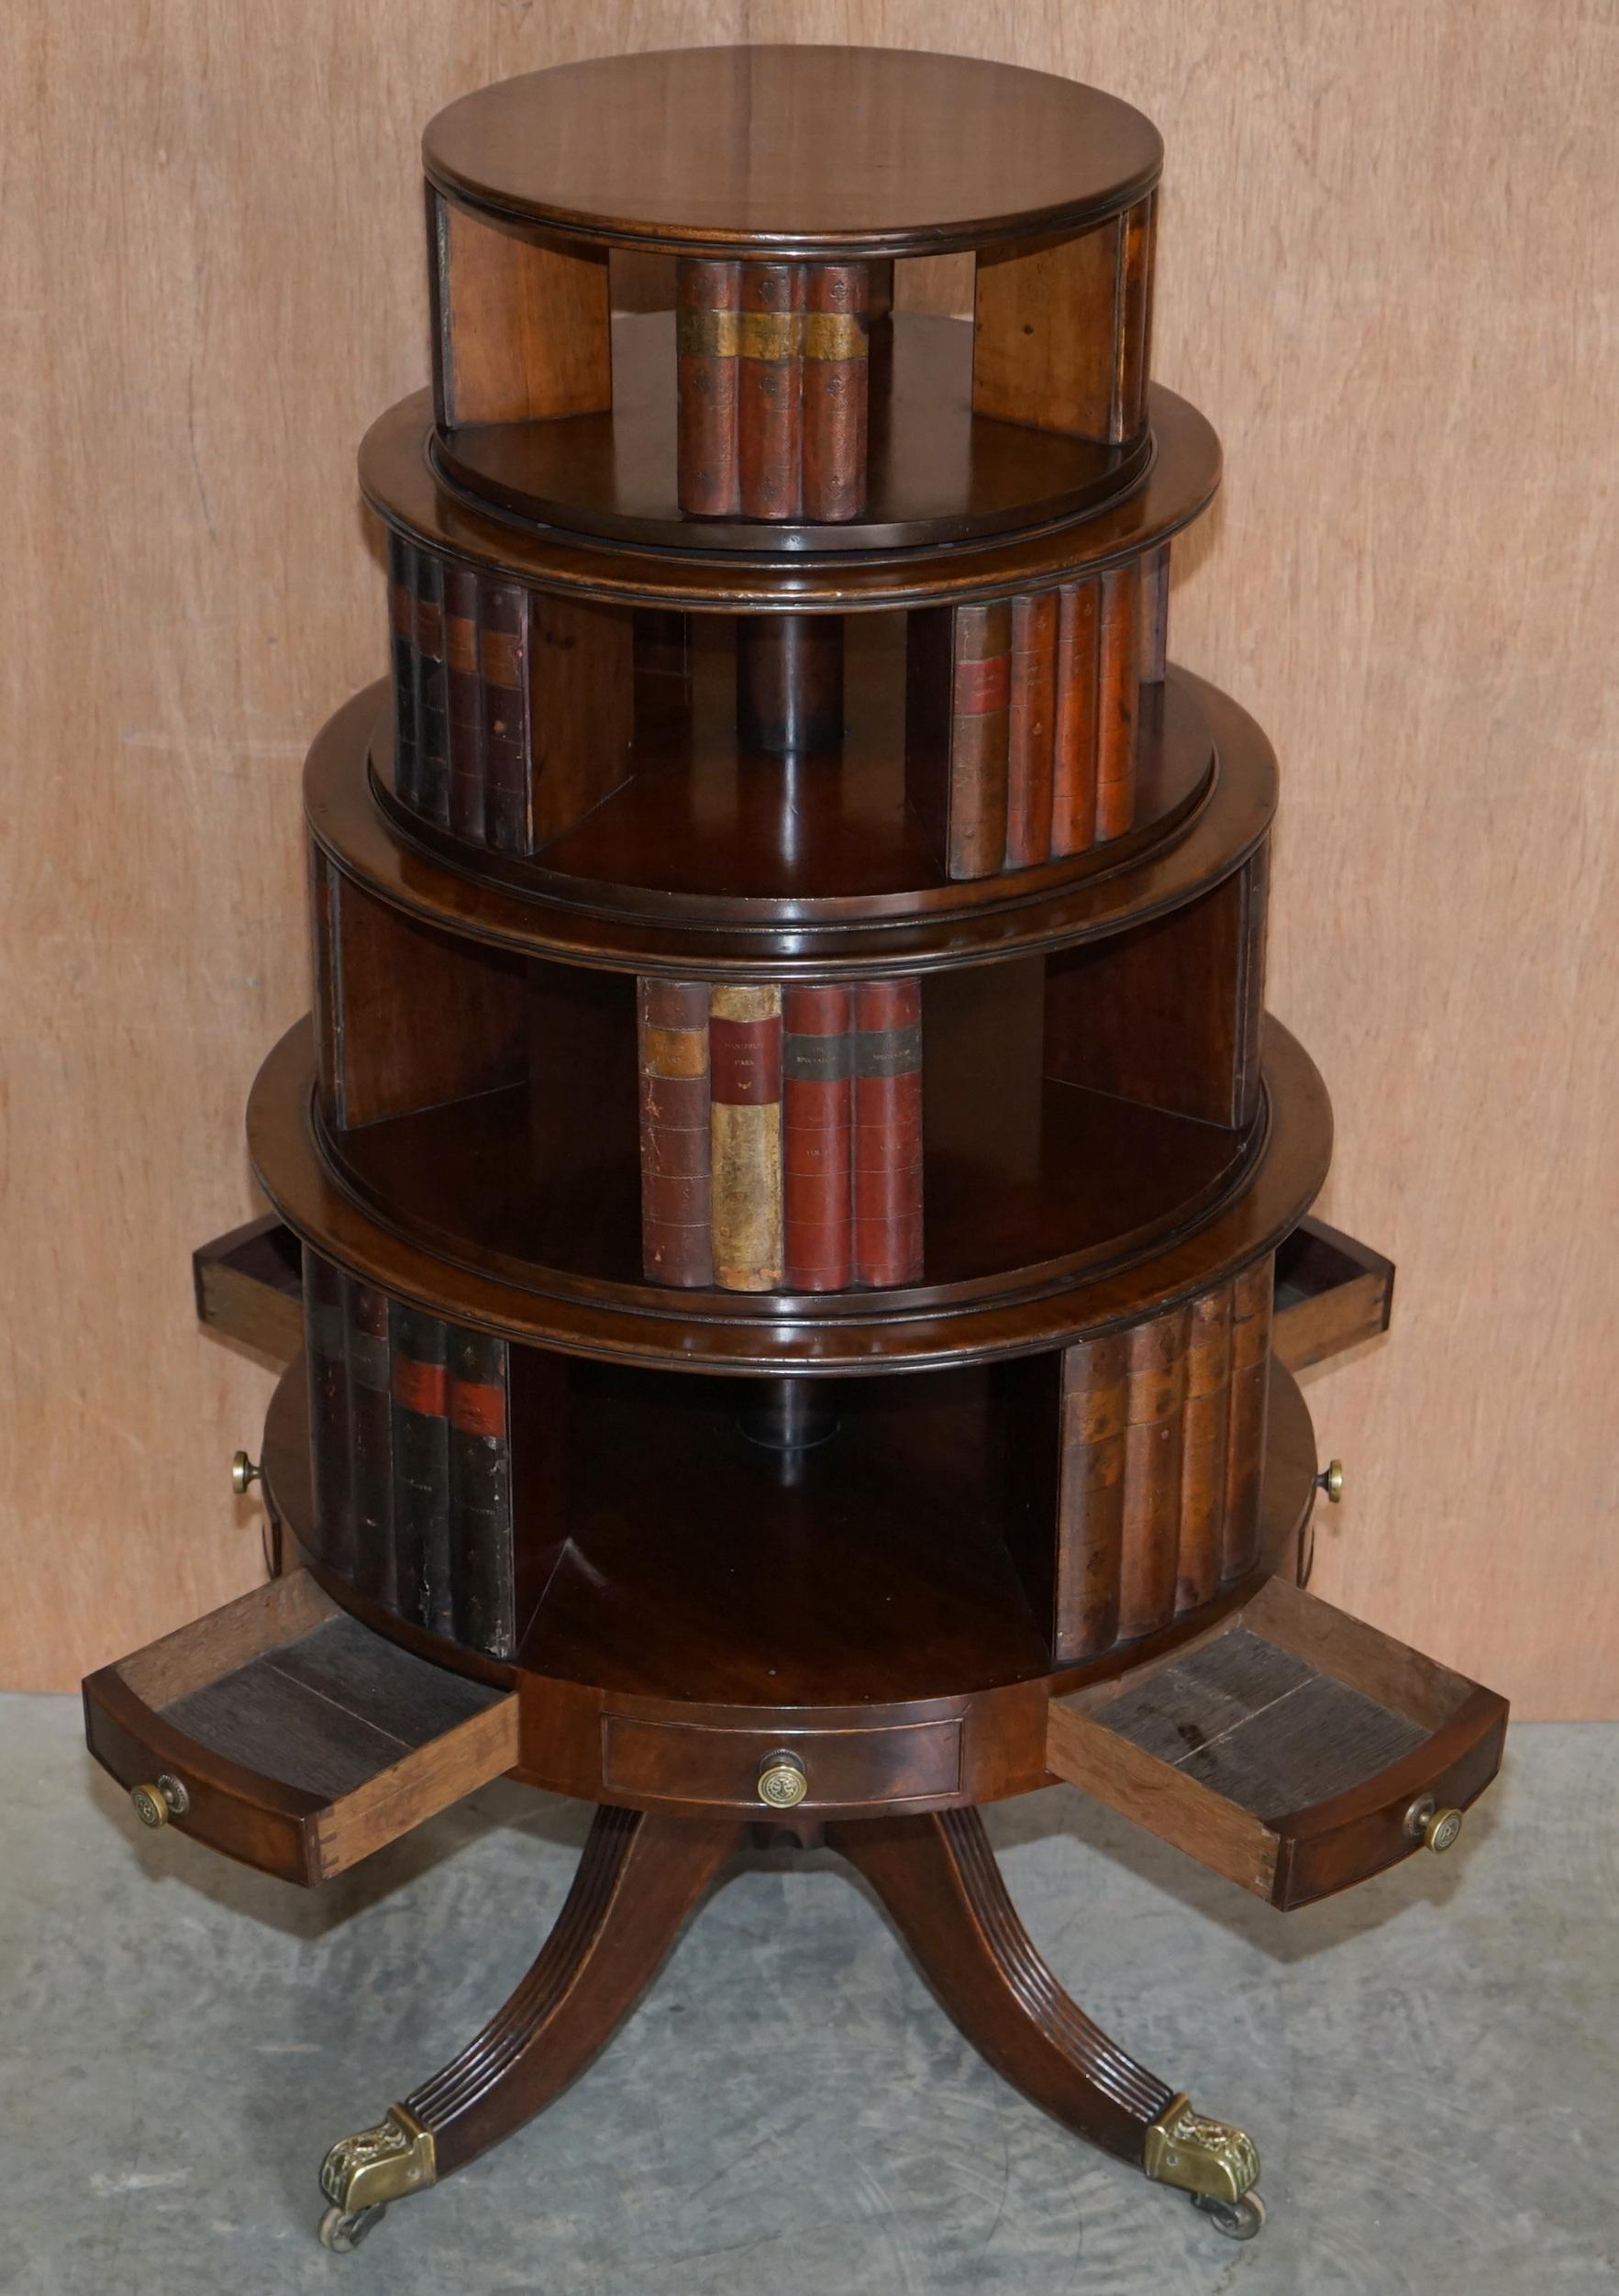 Restored Regency circa 1810 Revolving Hardwood Library Bookcase with Faux Books For Sale 12